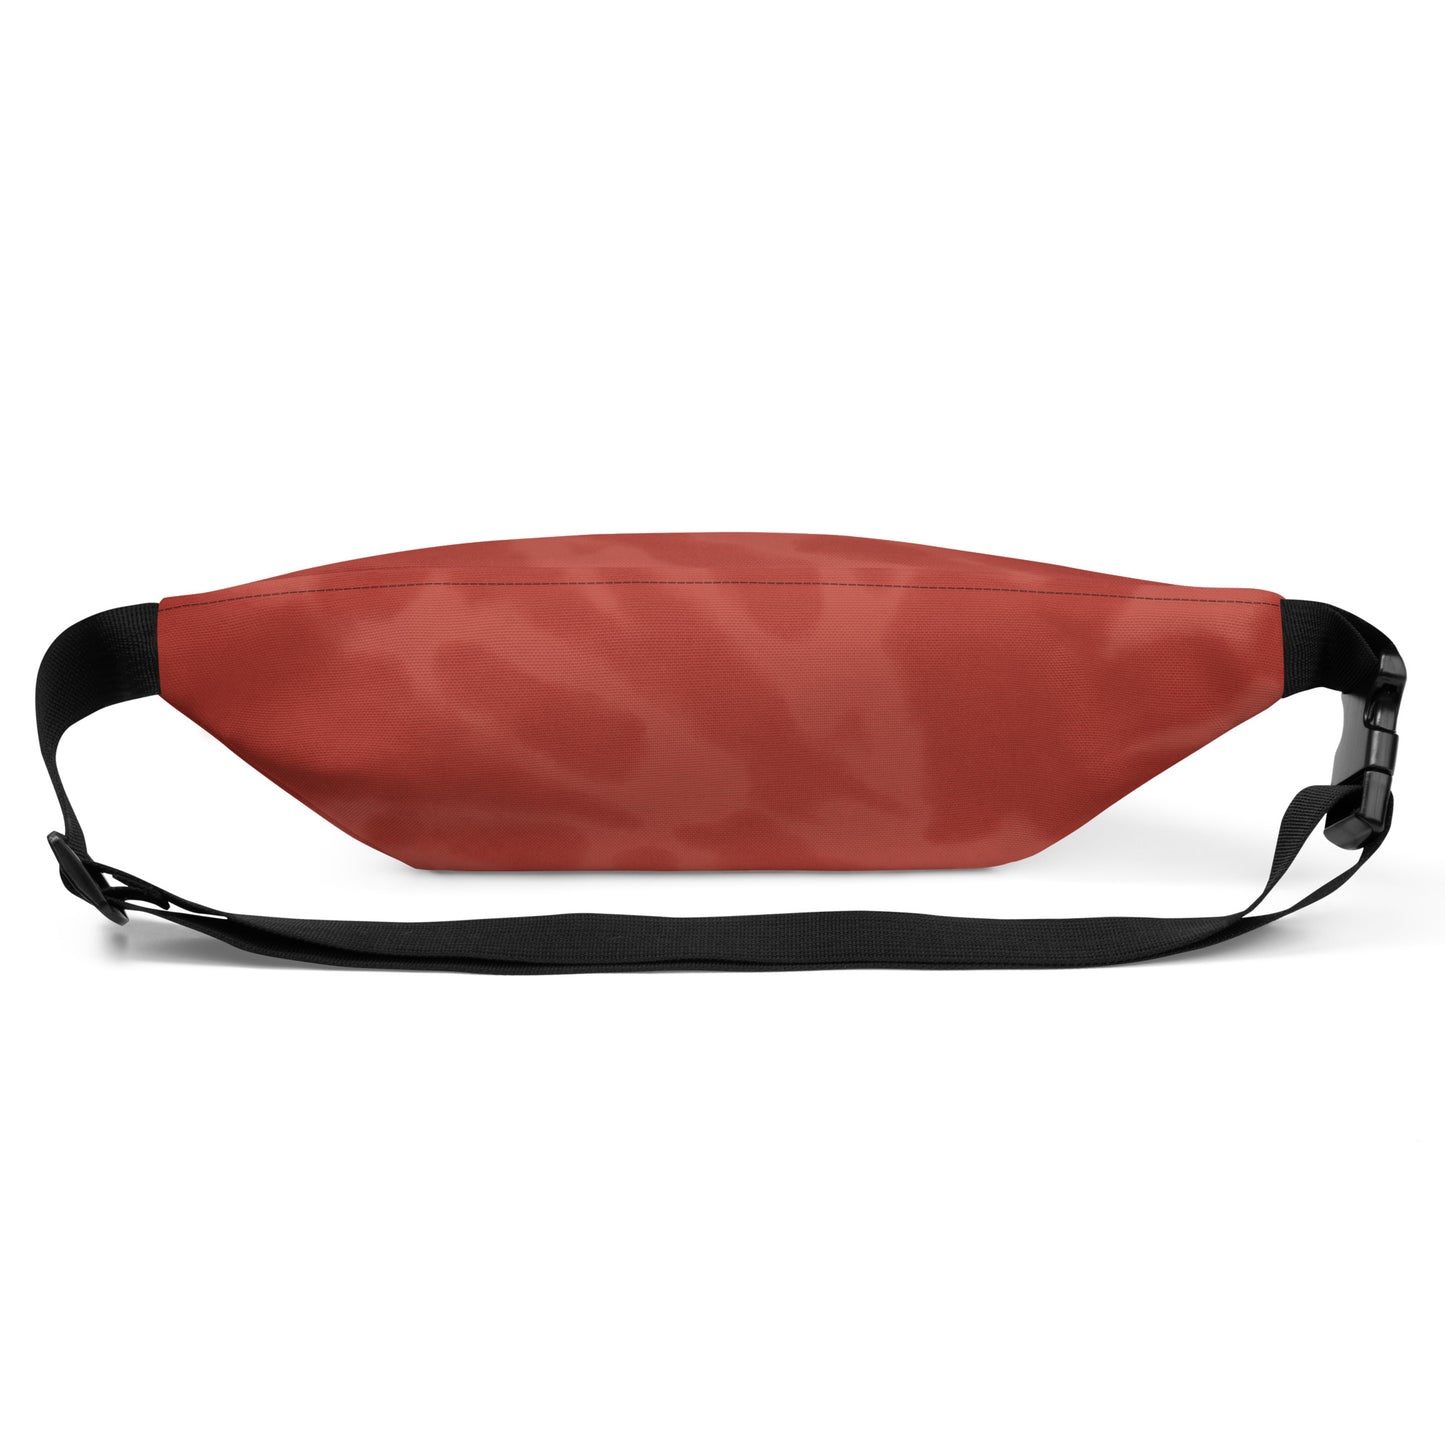 Travel Gift Fanny Pack - Red Tie-Dye • BCN Barcelona • YHM Designs - Image 09